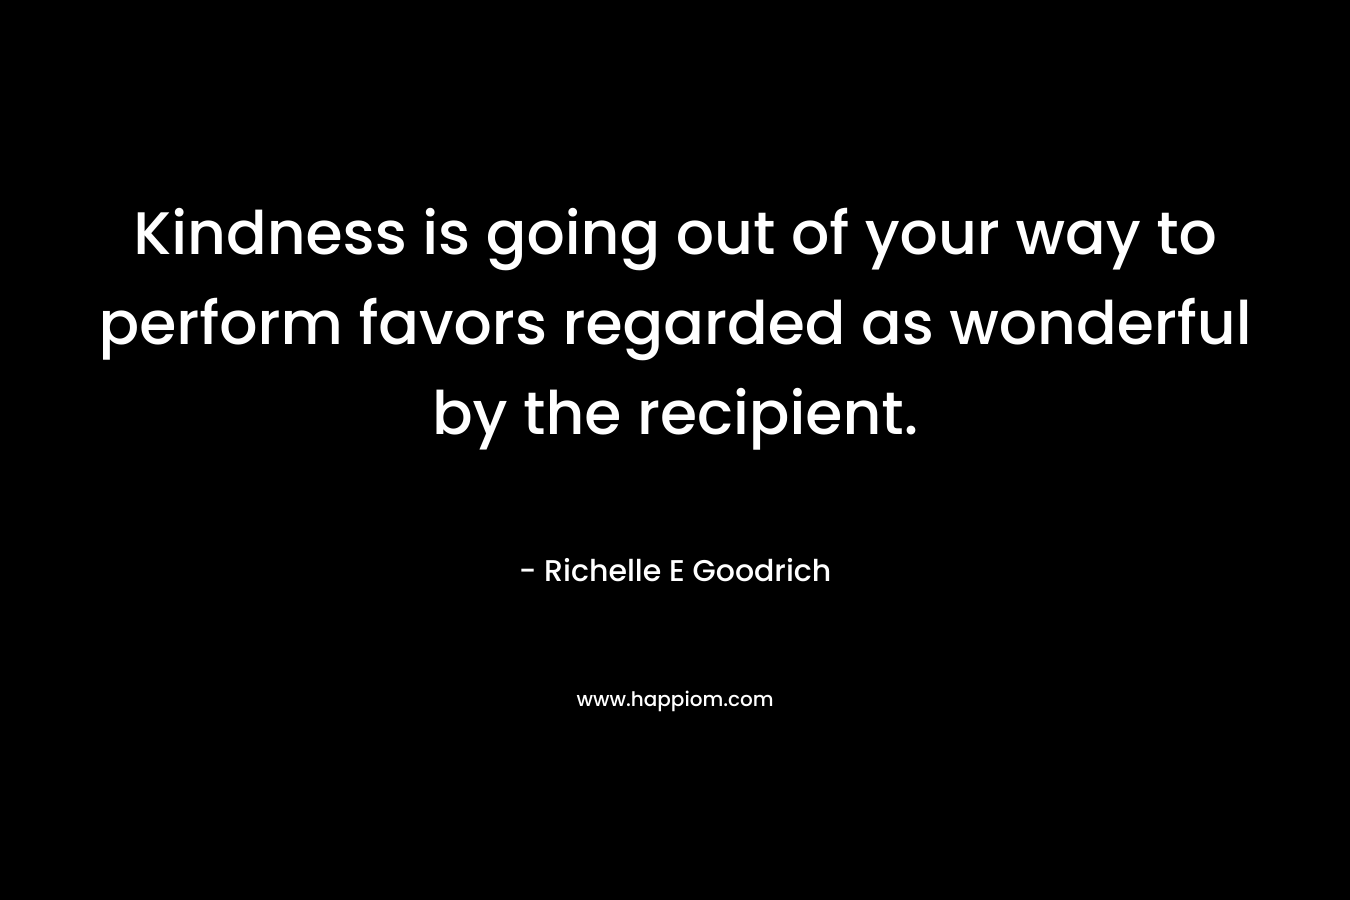 Kindness is going out of your way to perform favors regarded as wonderful by the recipient.